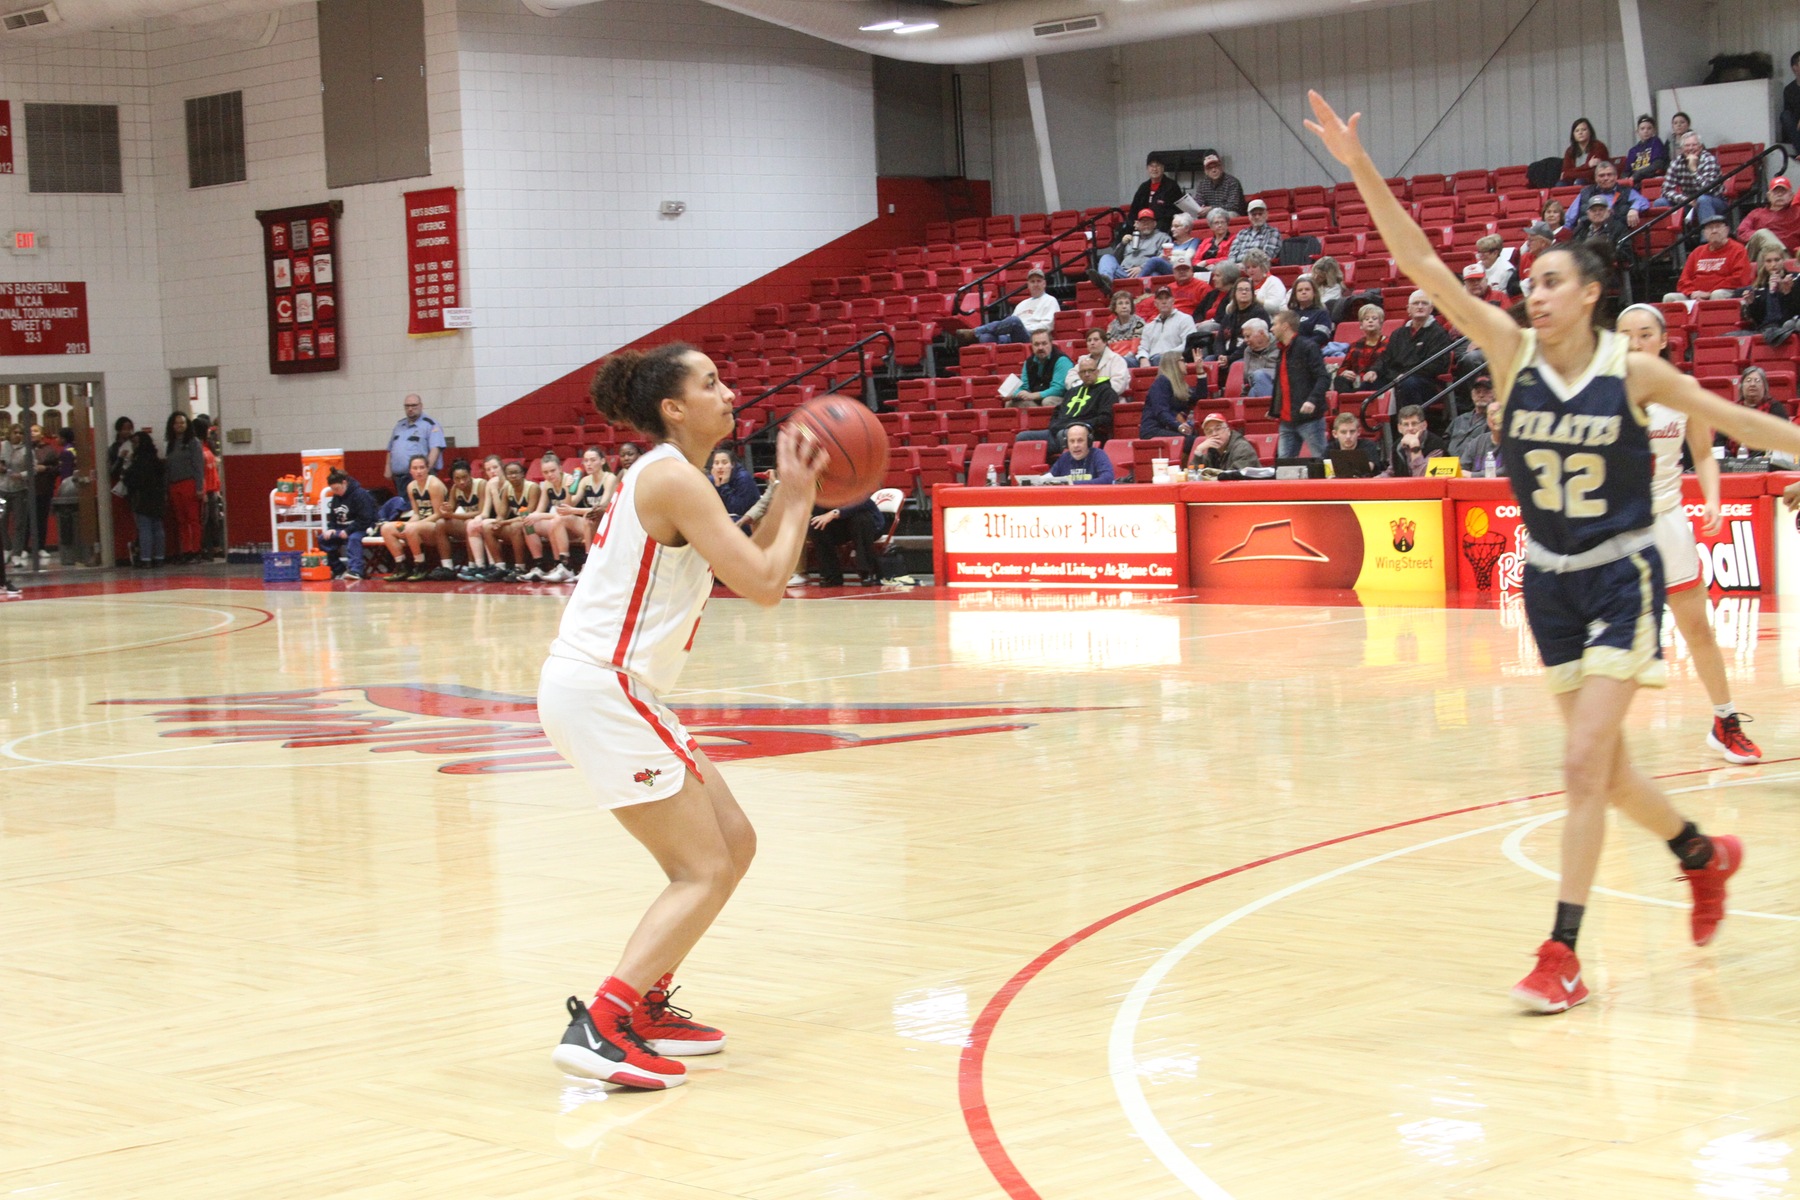 Red Raven Women's Sharpshooters Defeat the Pirates, 72-53